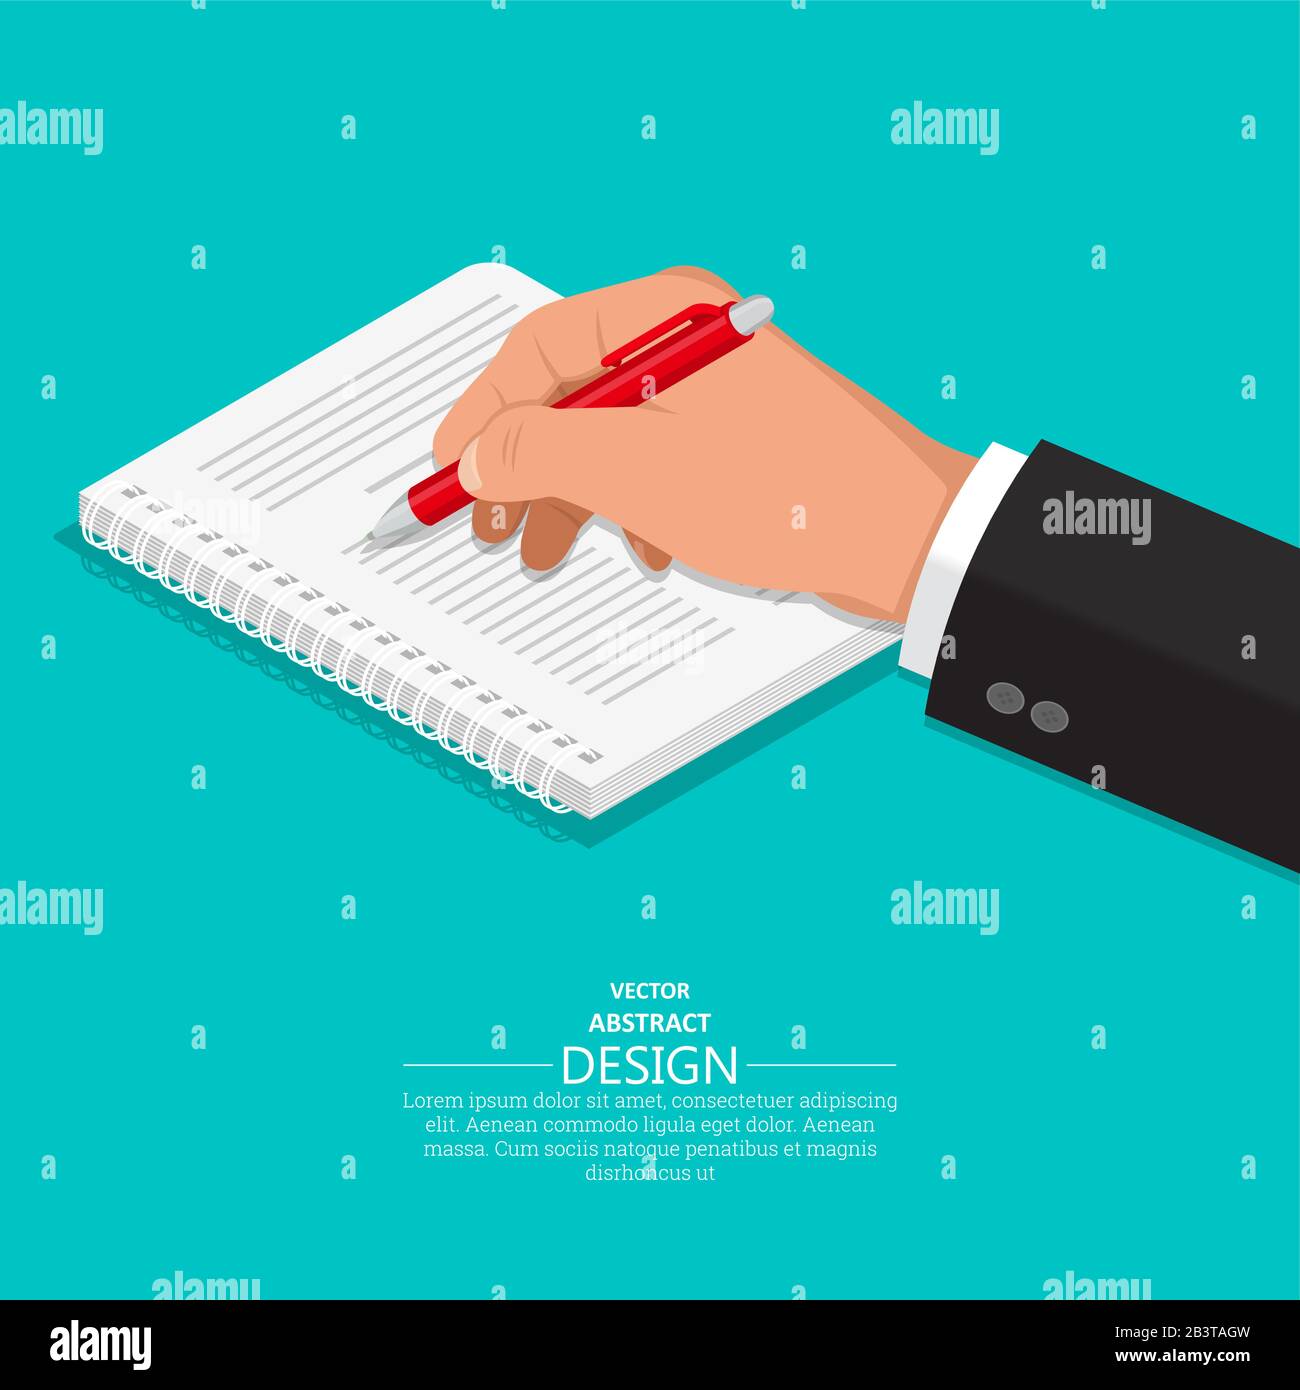 The hand with a pen writes on a notebook.3D style. A vector illustration in an isometry.Flat design. Business concept.Design elements. Stock Vector